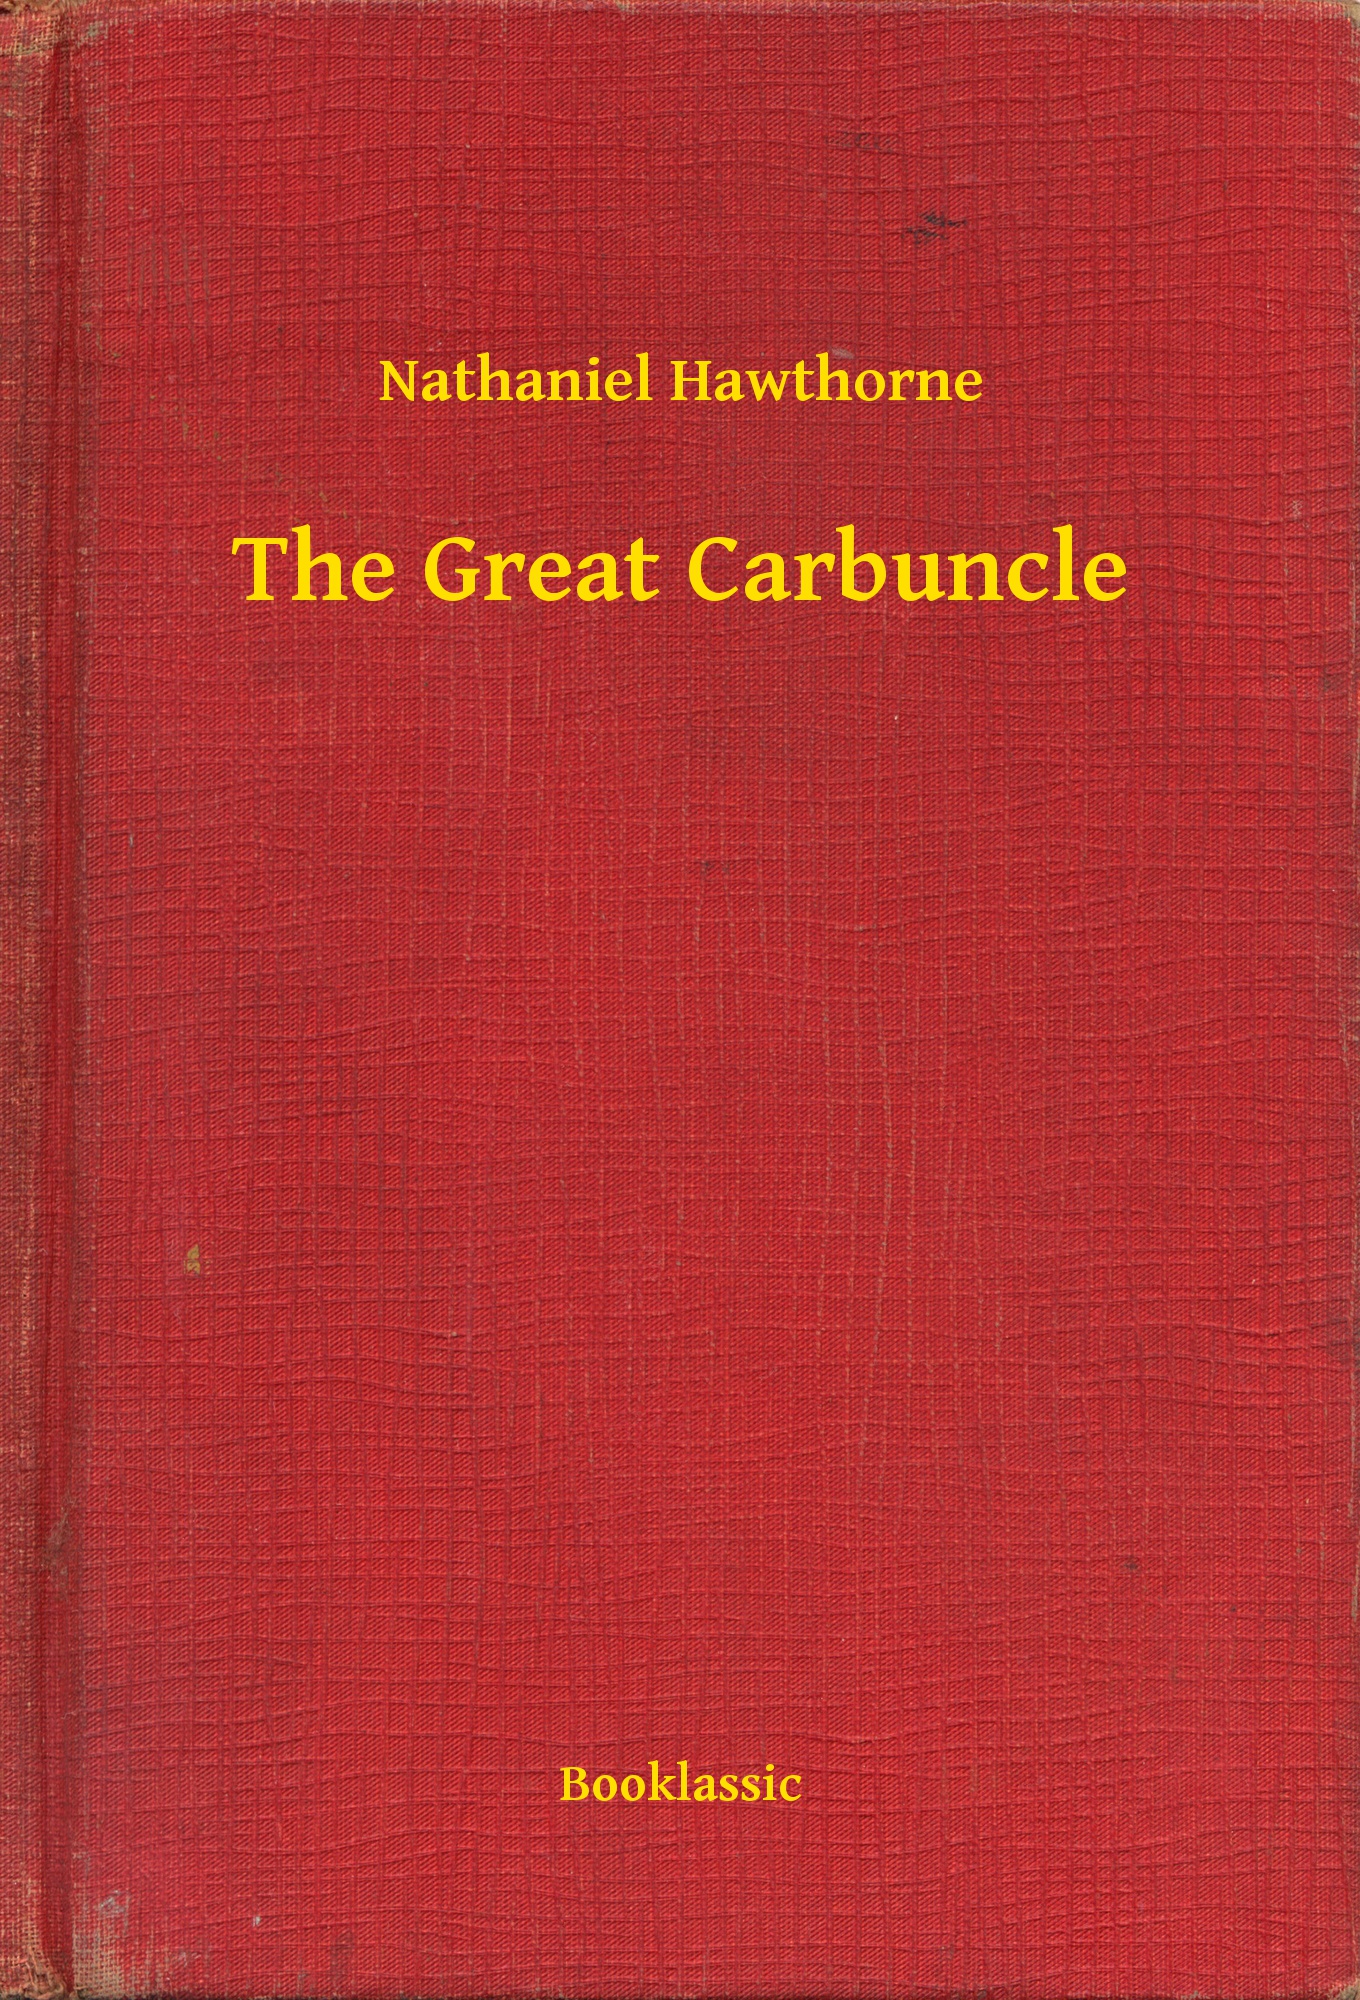 The Great Carbuncle